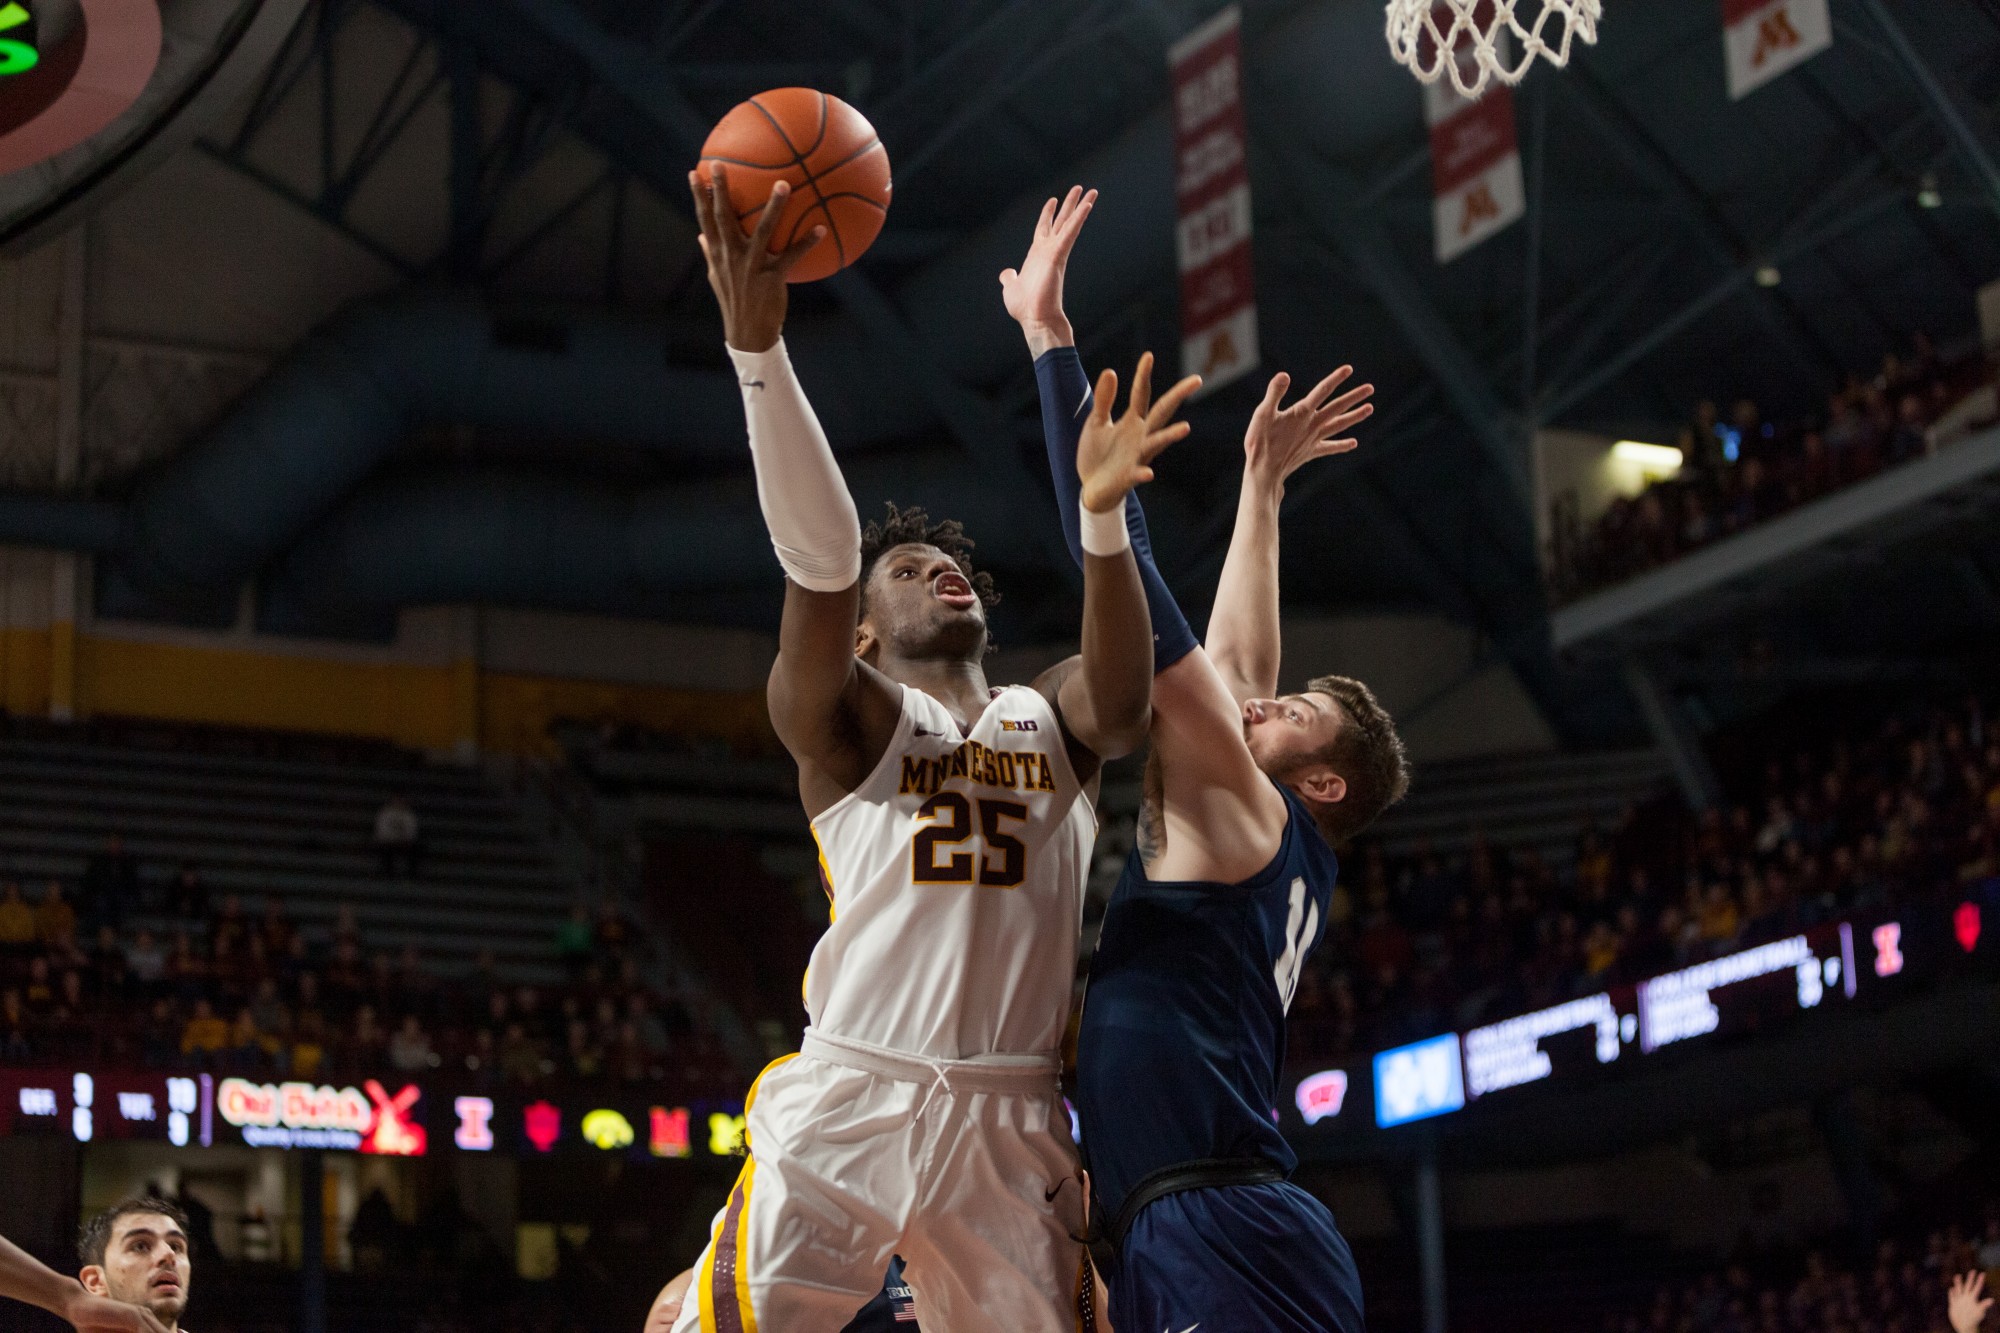 Gophers Center Daniel Oturu pushes past a defender for a layup at Williams Arena on Wednesday, Jan. 15.  Minnesota defeated the Penn State Nittany Lions 75-69. (Kamaan Richards / Minnesota Daily)